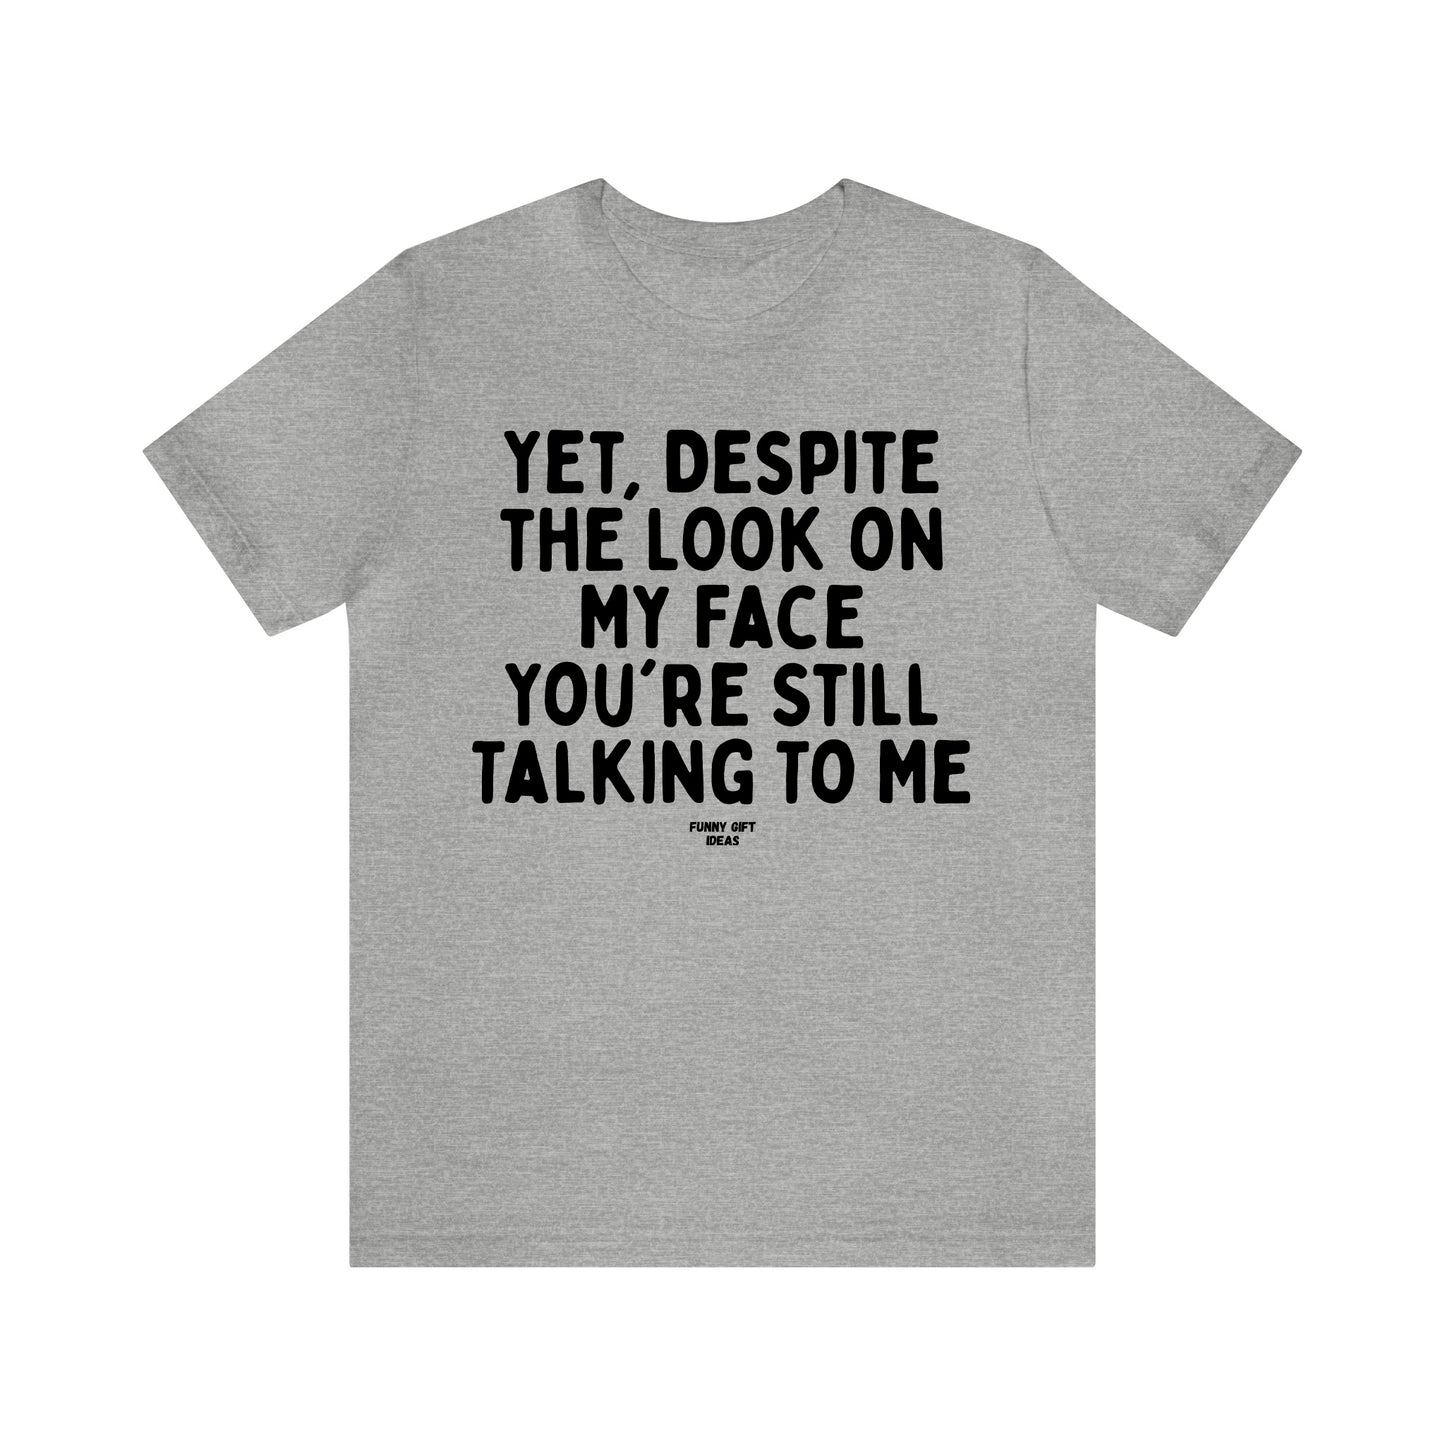 Funny Shirts for Women - Yet, Despite the Look on My Face You're Still Talking to Me - Women's T Shirts